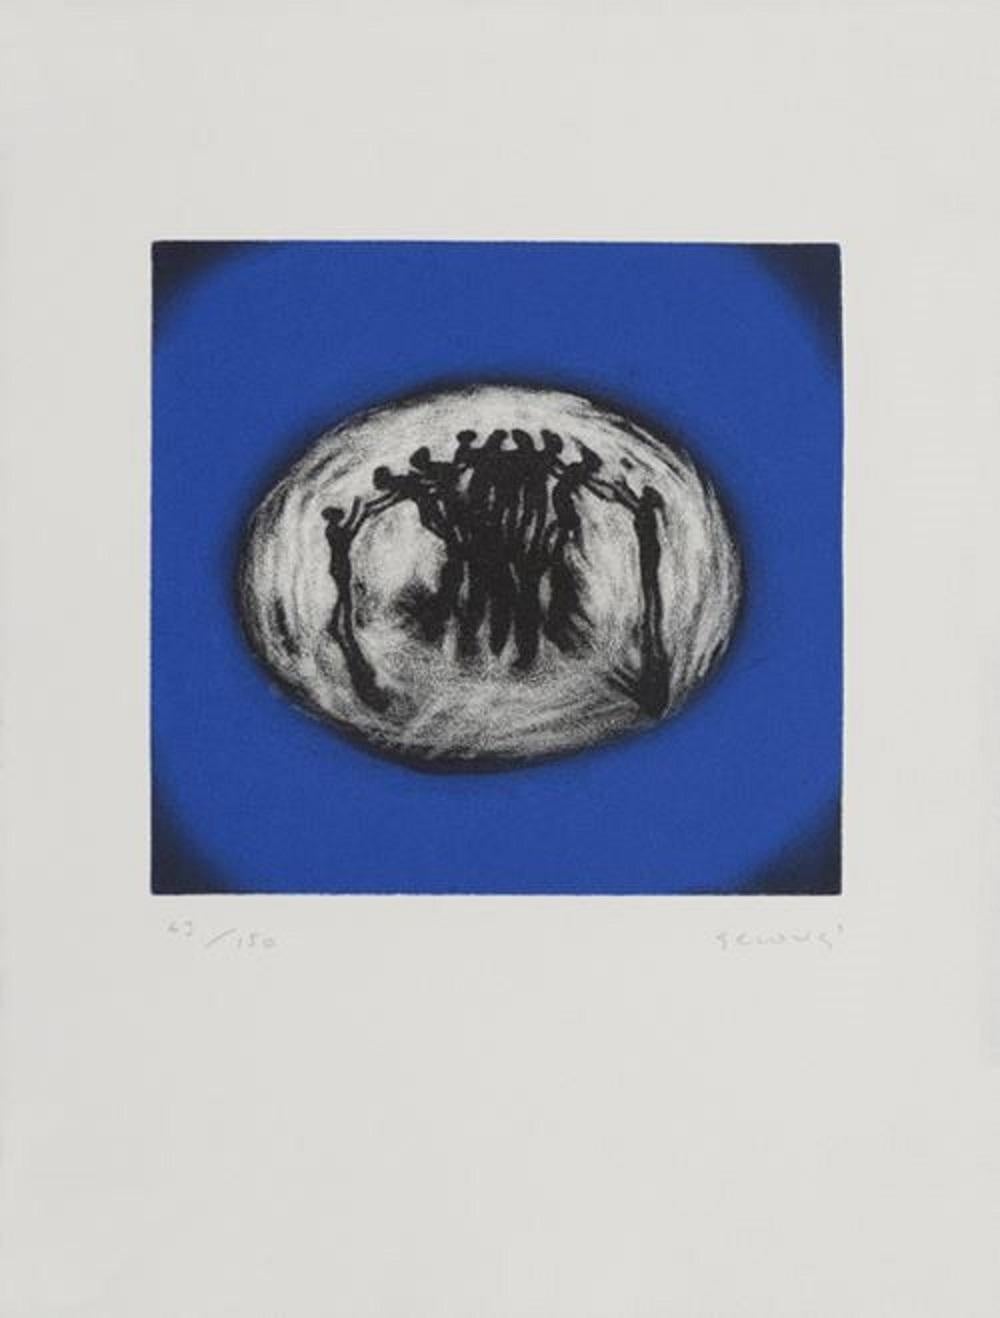 Juan Genoves (Spain, 1930-2020)
'Untitled', 1996
engraving, silkscreen on paper
15.8 x 11.9 in. (40 x 30 cm.)
Edition of 150
ID: GEN1205-005-150_1
Hand-signed by author
________________________________
Juan Genovés is a Spanish artist known for his